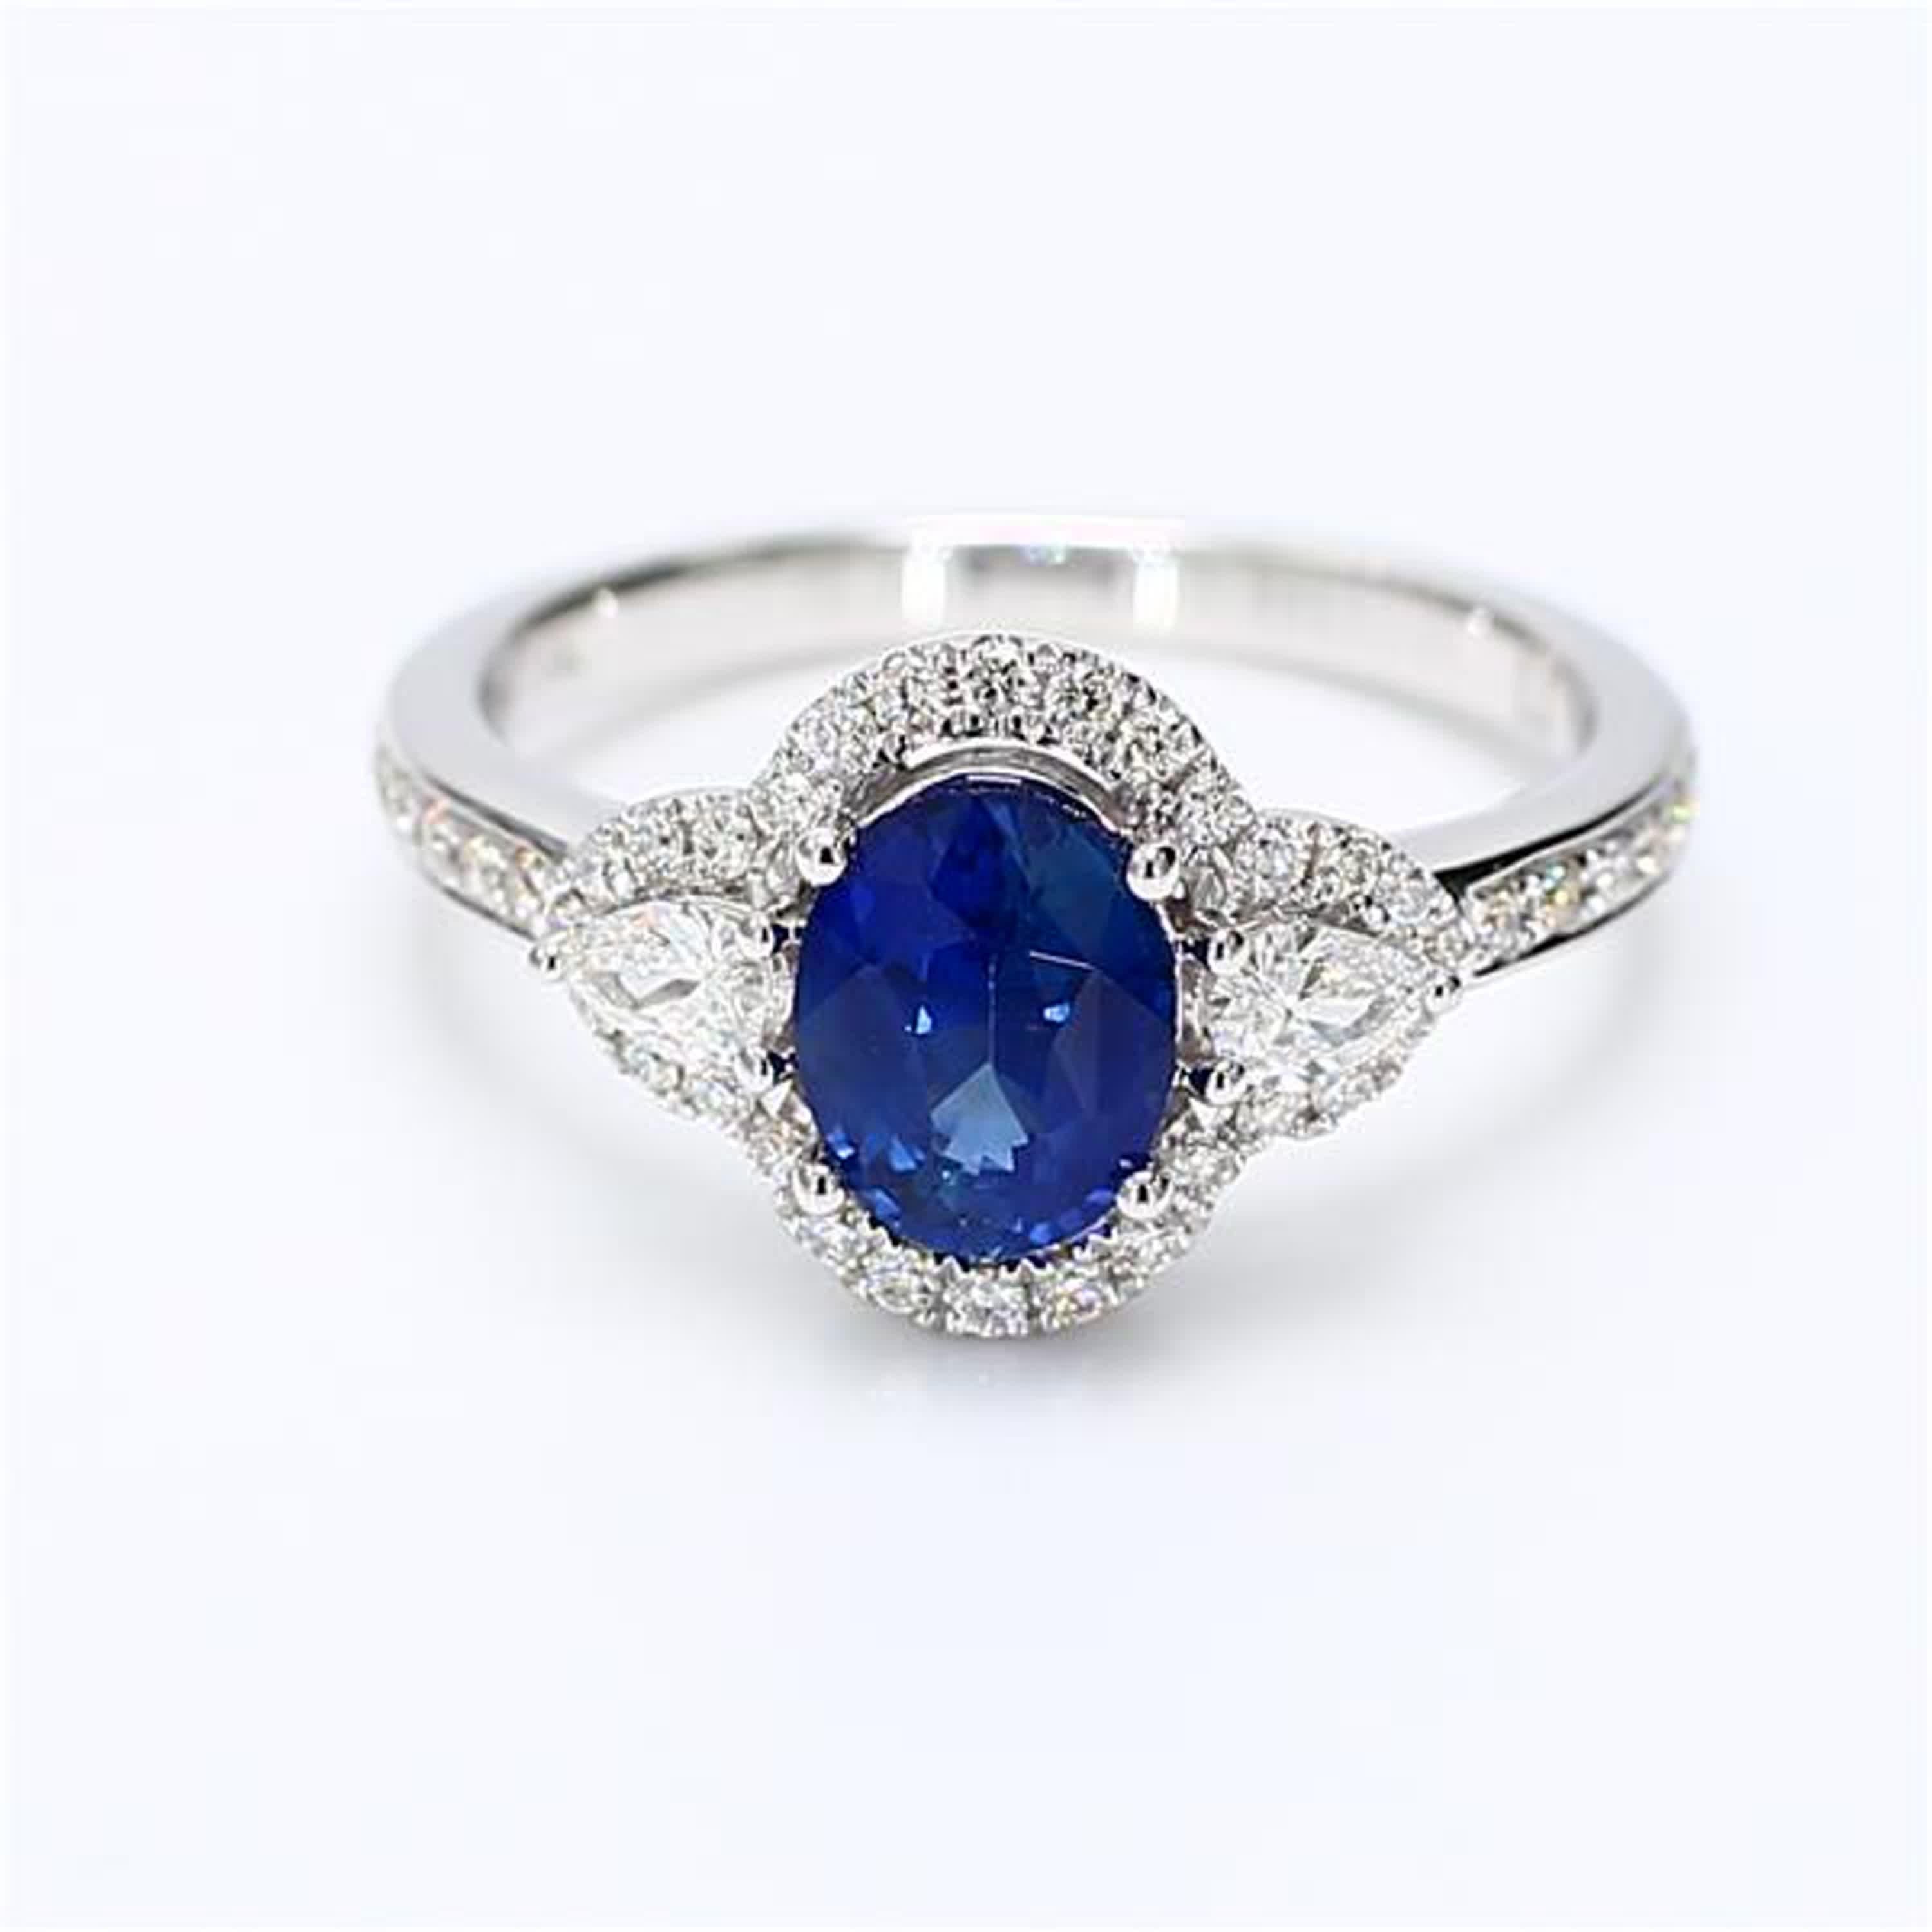 RareGemWorld's classic sapphire ring. Mounted in a beautiful 18K White Gold setting with a natural oval cut blue sapphire. The sapphire is surrounded by natural pear cut white diamonds and natural round white diamond melee. This ring is guaranteed